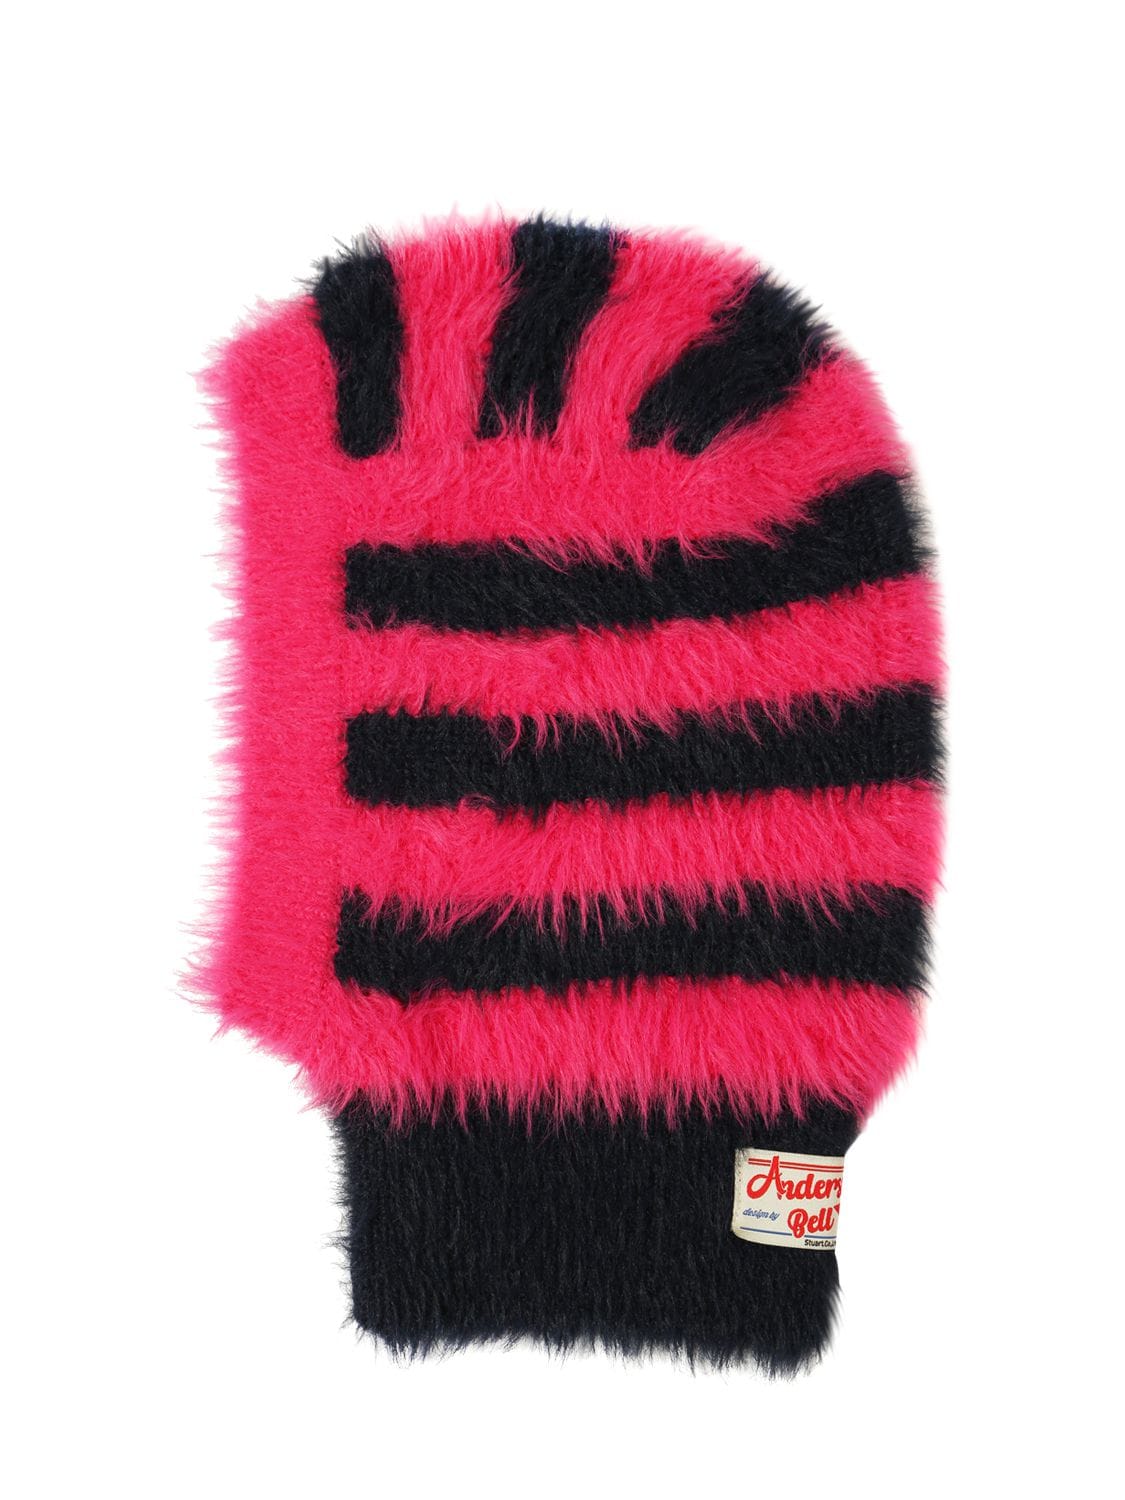 Andersson Bell Knit Balaclava In Black,pink | ModeSens